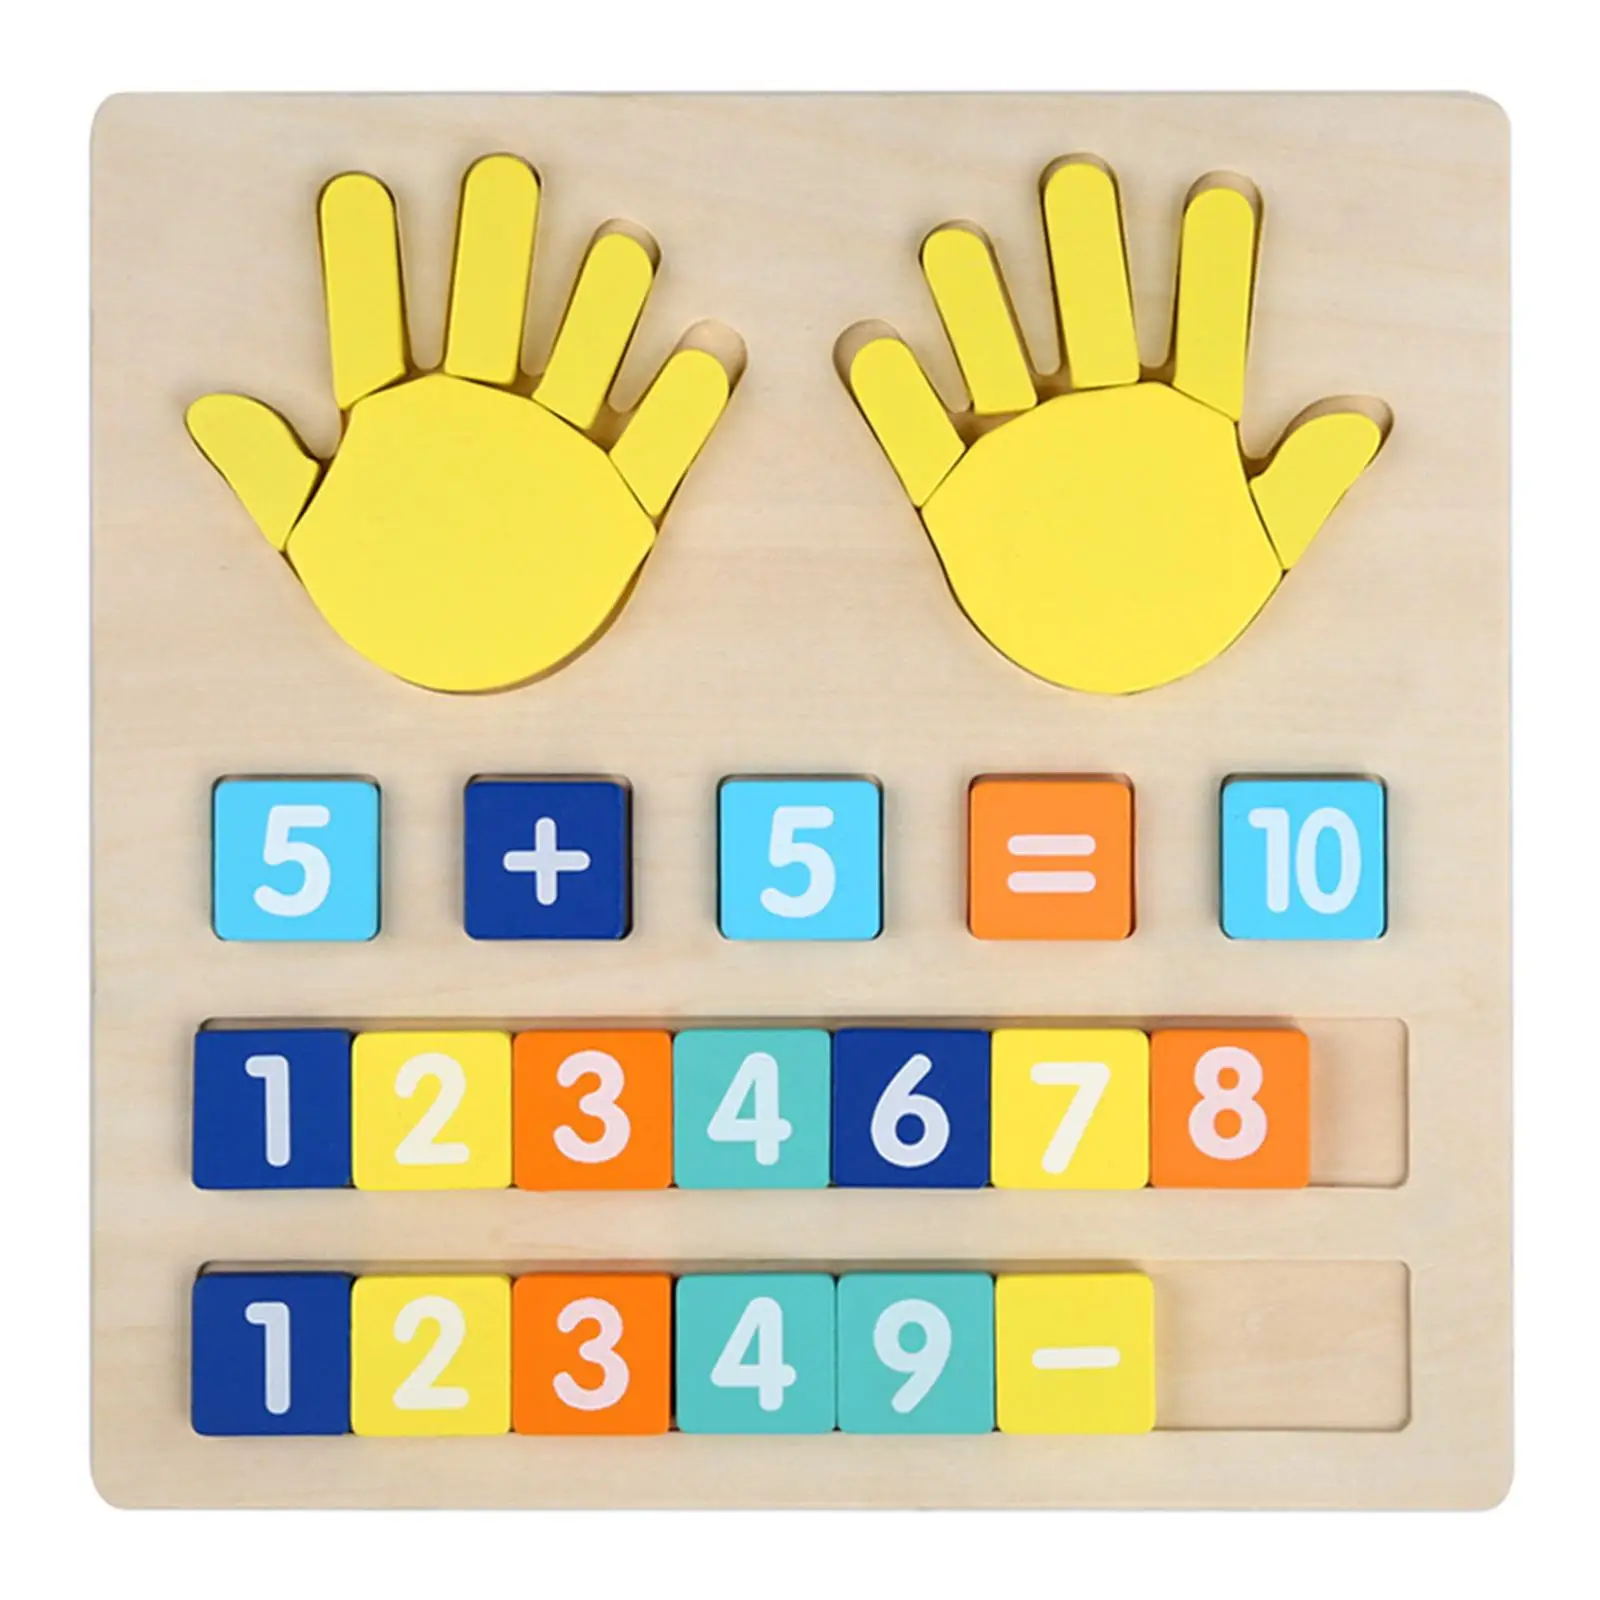 Finger Numbers Counting Toy Educational Learning Montessori Mathematics Busy Board for Cognitive Development Gift Home Preschool